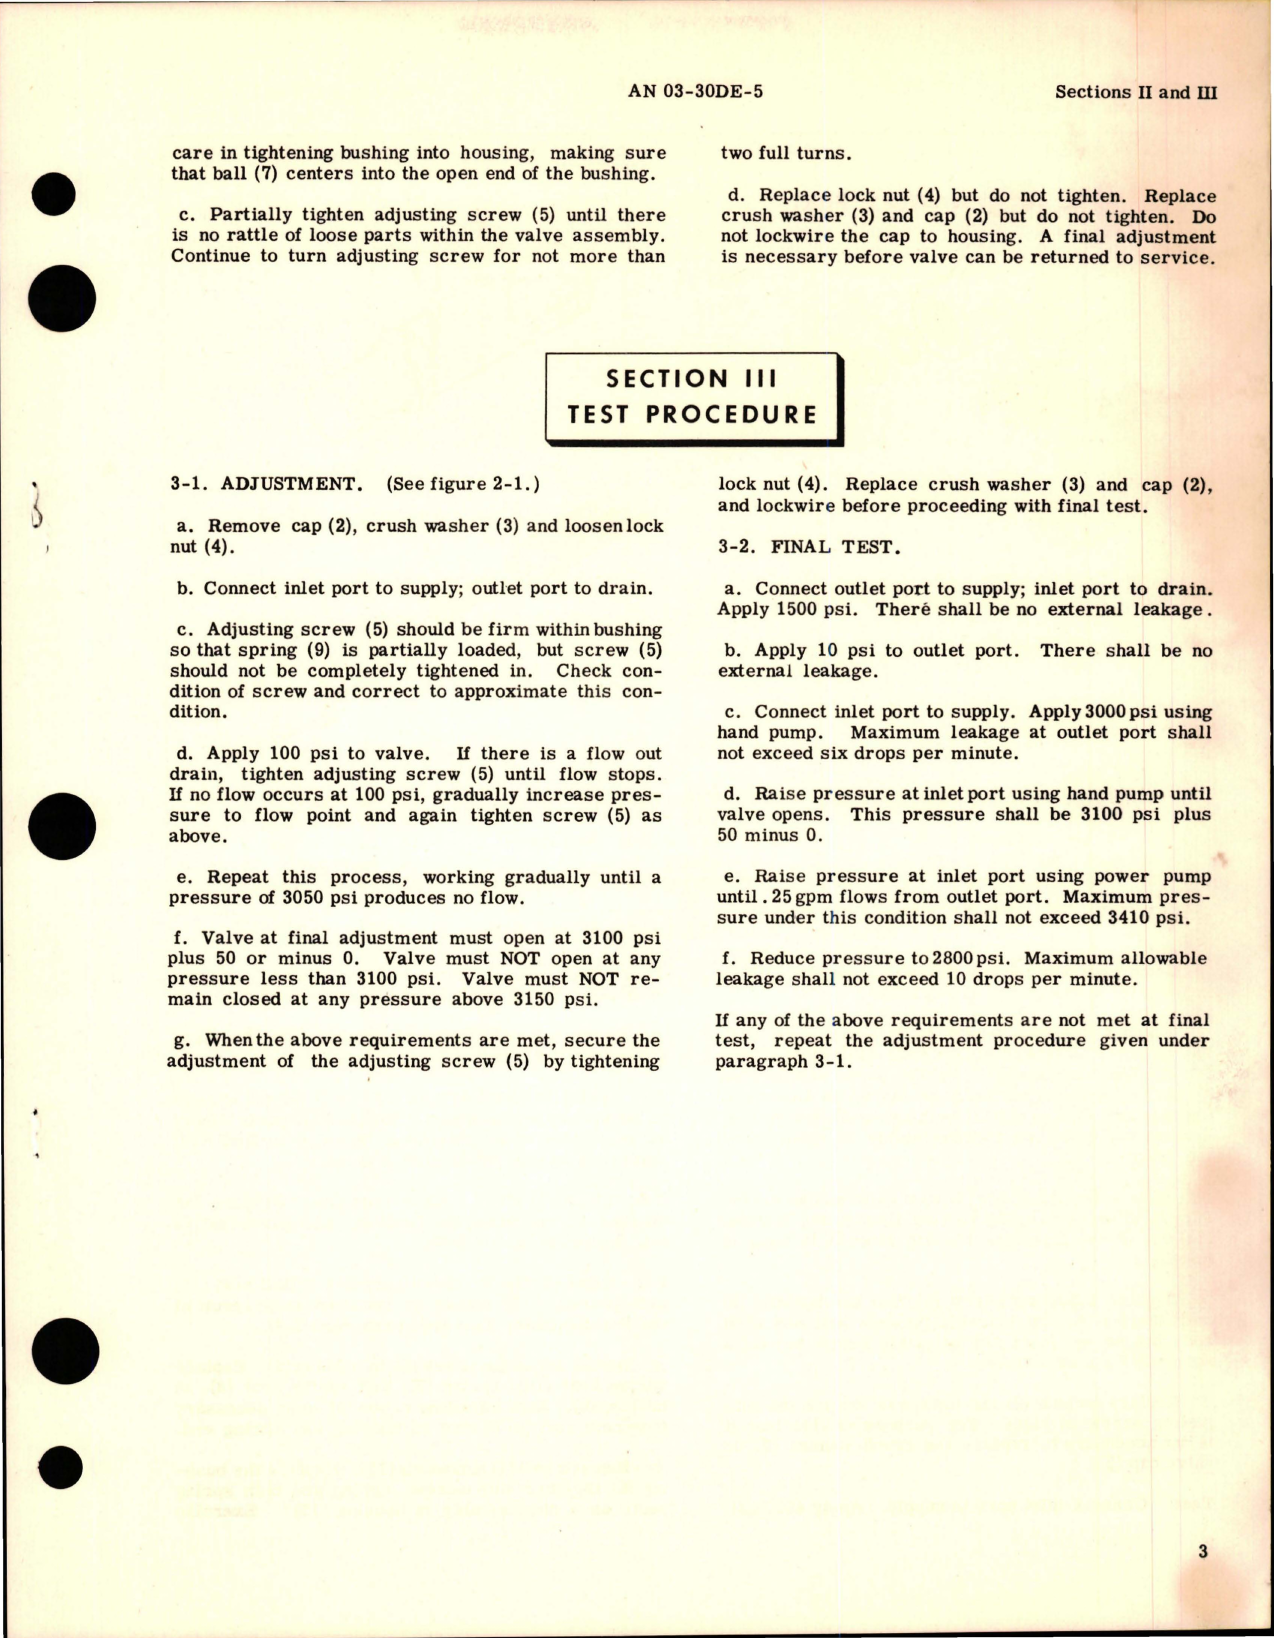 Sample page 5 from AirCorps Library document: Overhaul Instructions for Relief Valve Assembly - 6750